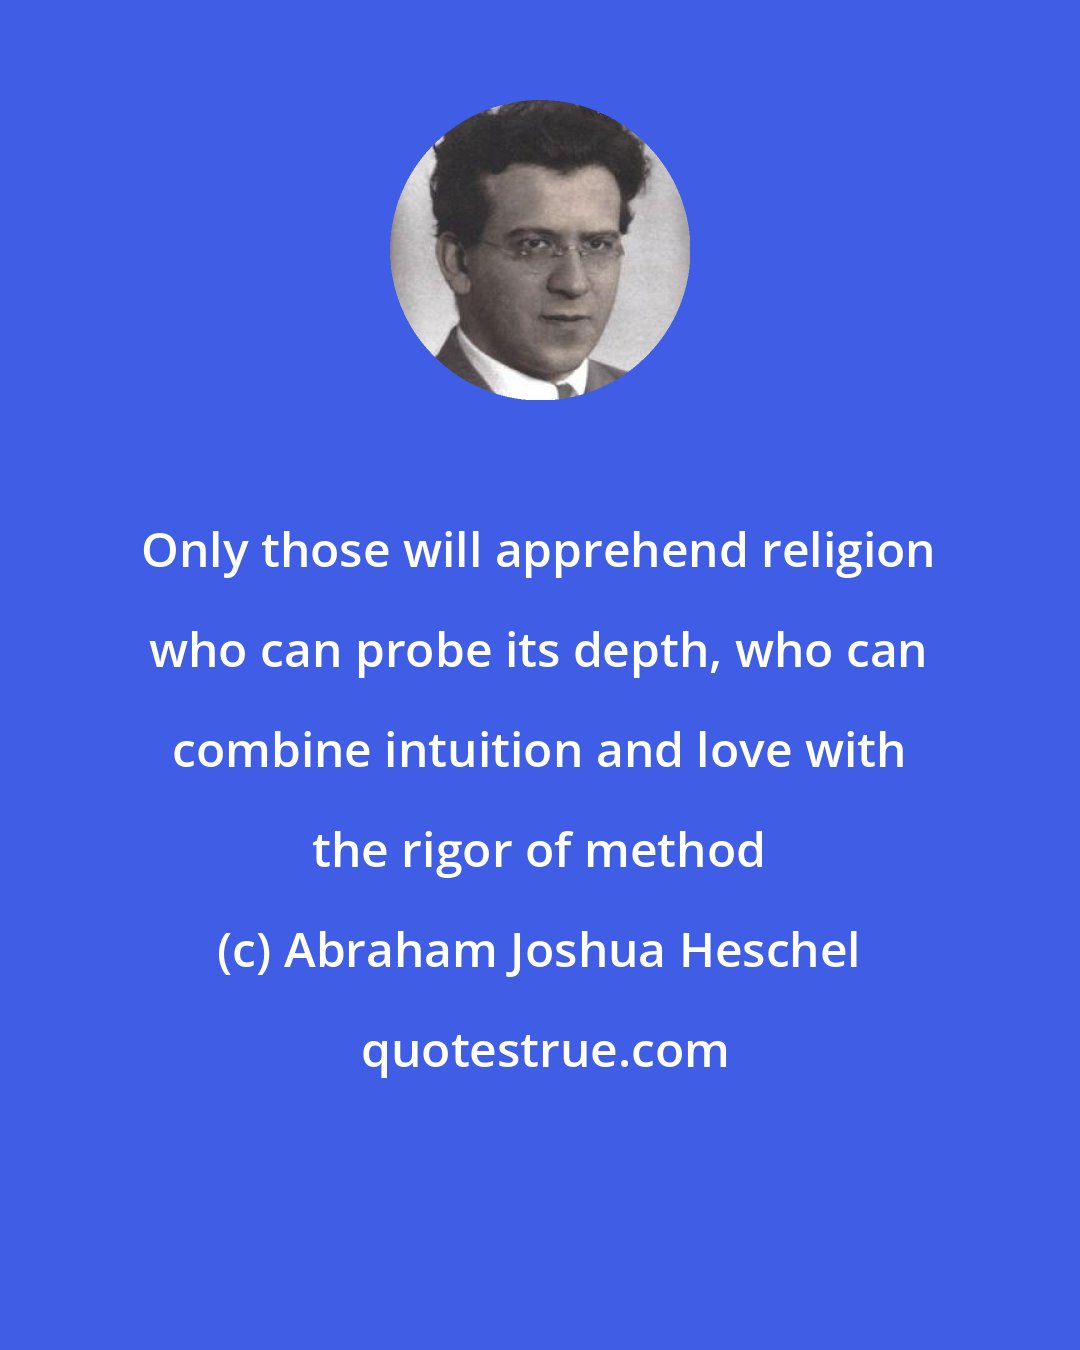 Abraham Joshua Heschel: Only those will apprehend religion who can probe its depth, who can combine intuition and love with the rigor of method